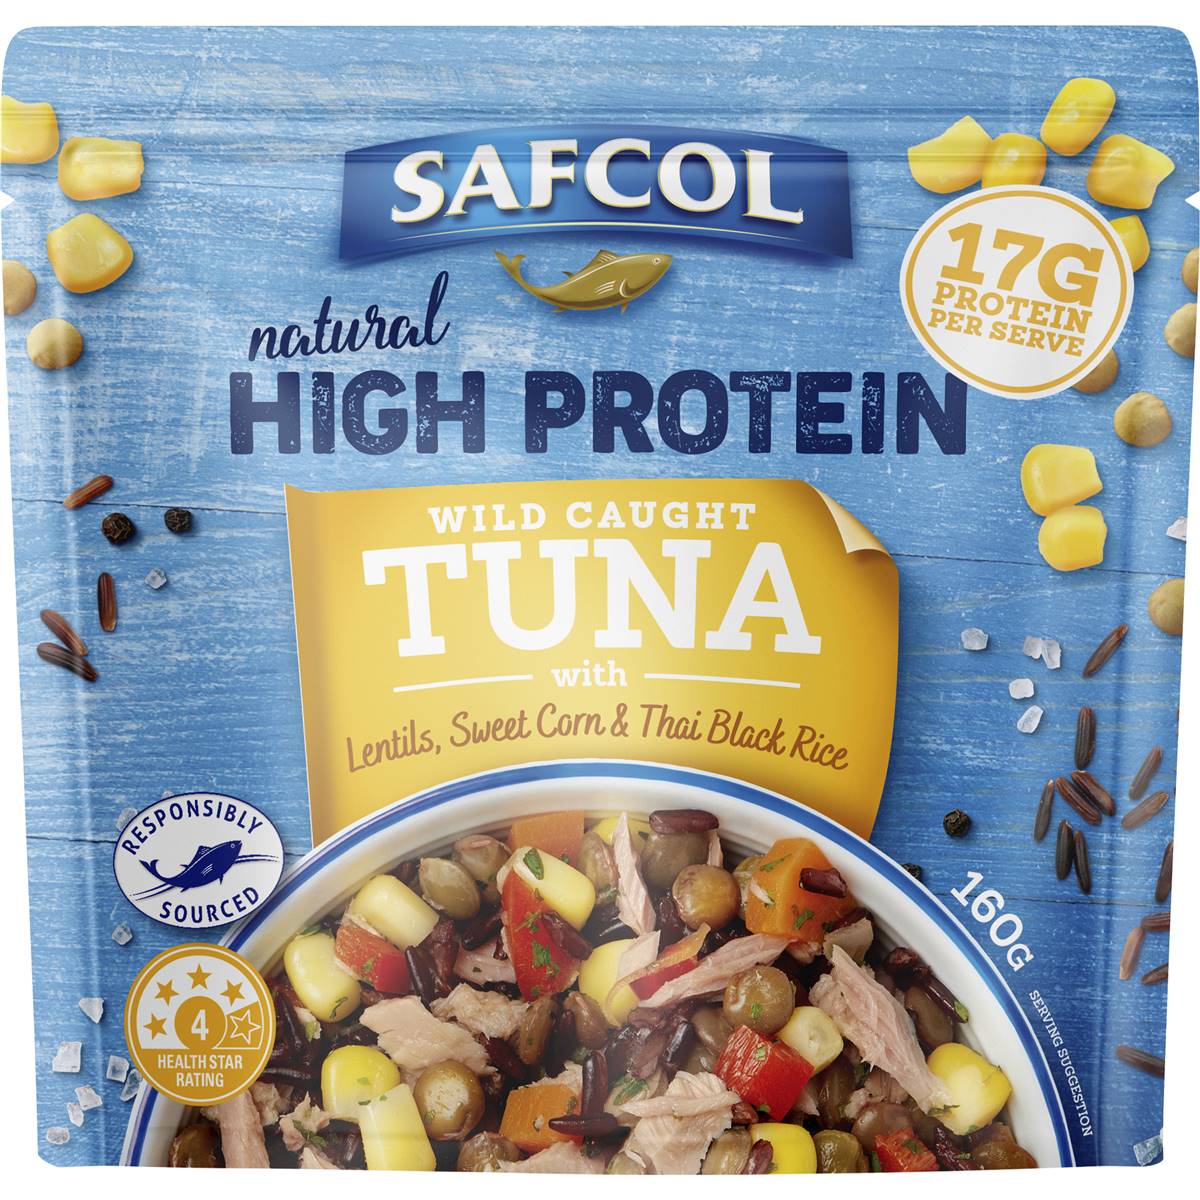 Calories in Safcol Tuna Pouch Lentils & Black Rice